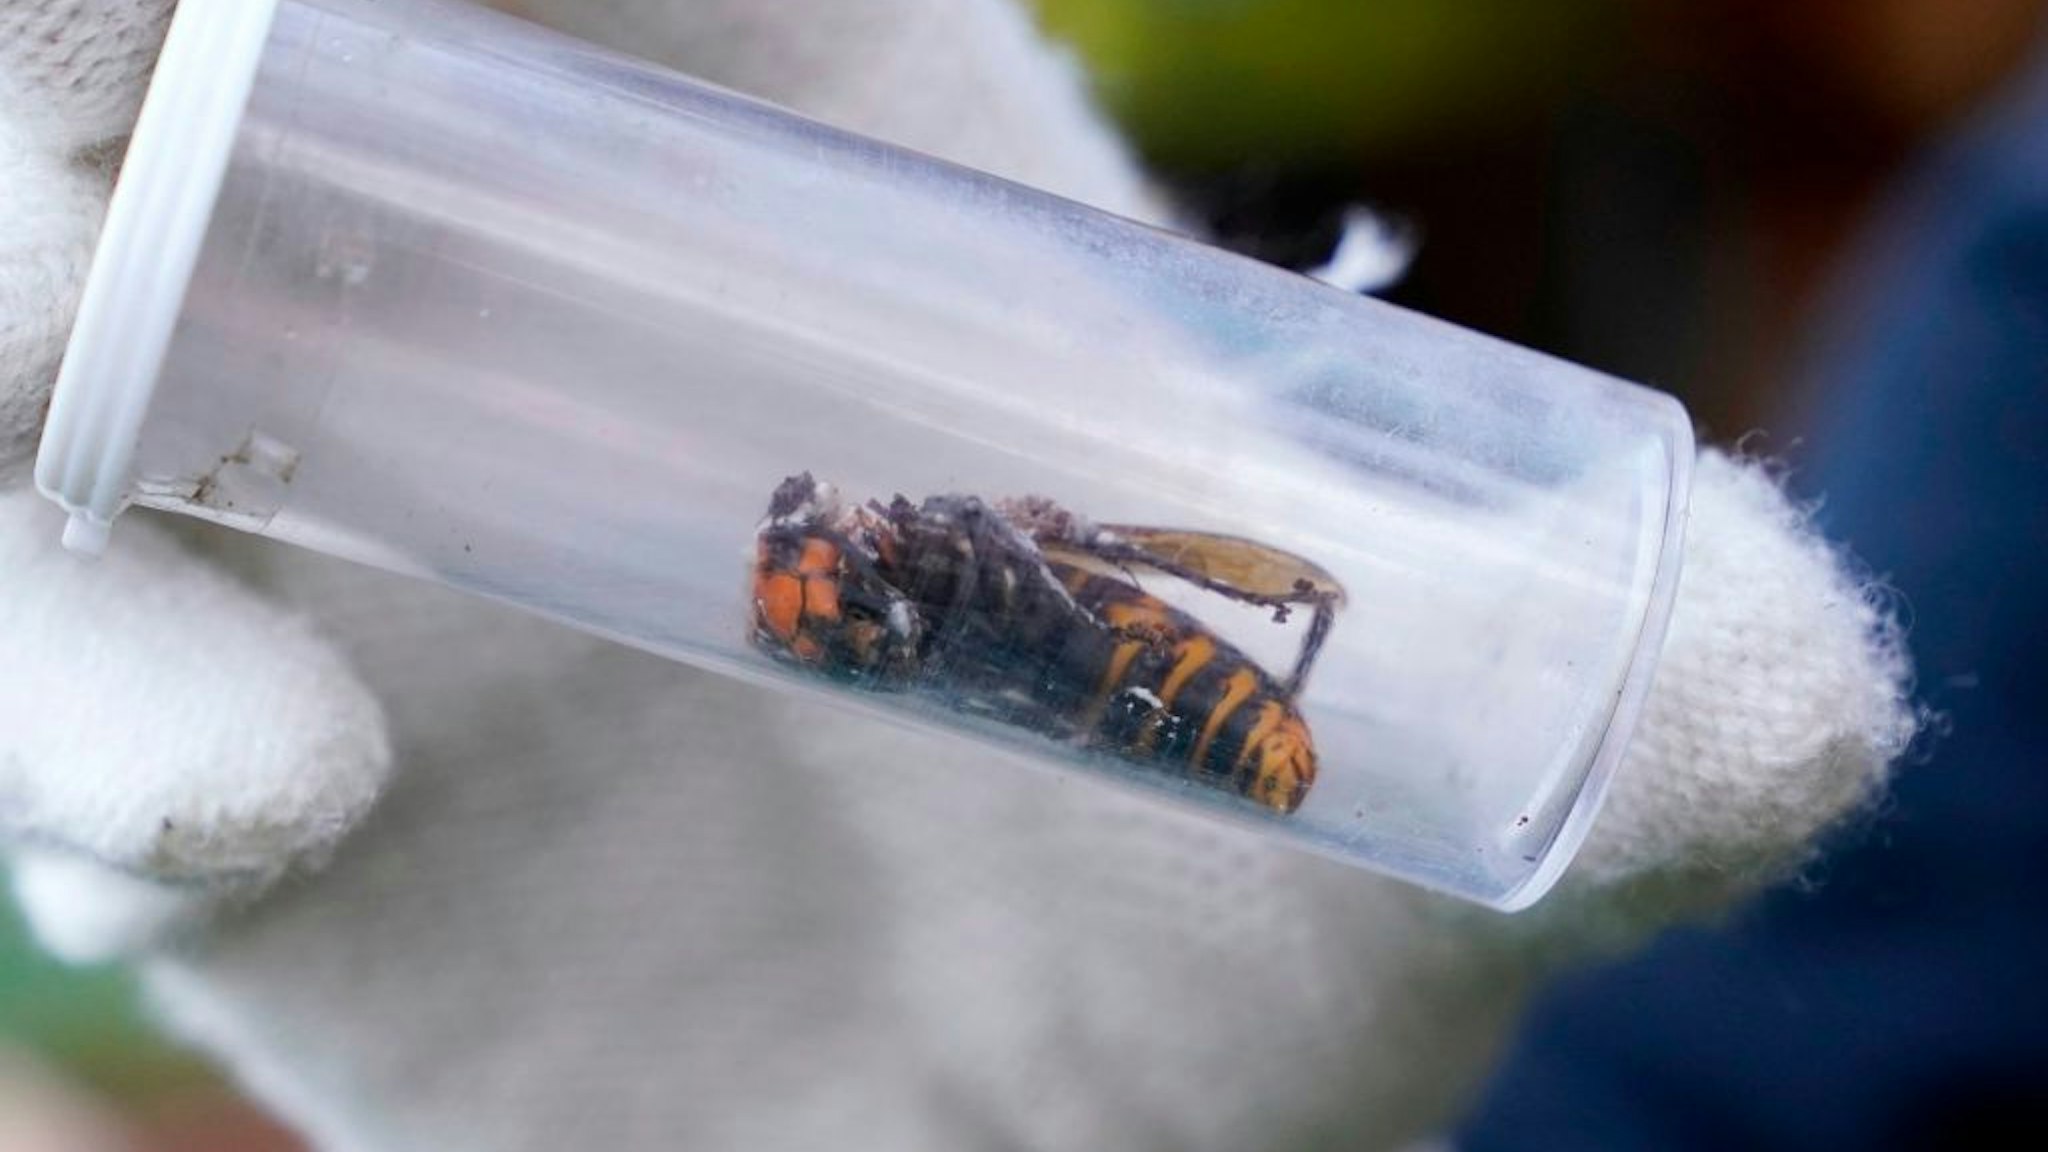 A Washington State Department of Agriculture worker displays an Asian giant hornet taken from a nest on October 24, 2020, in Blaine, Washington.